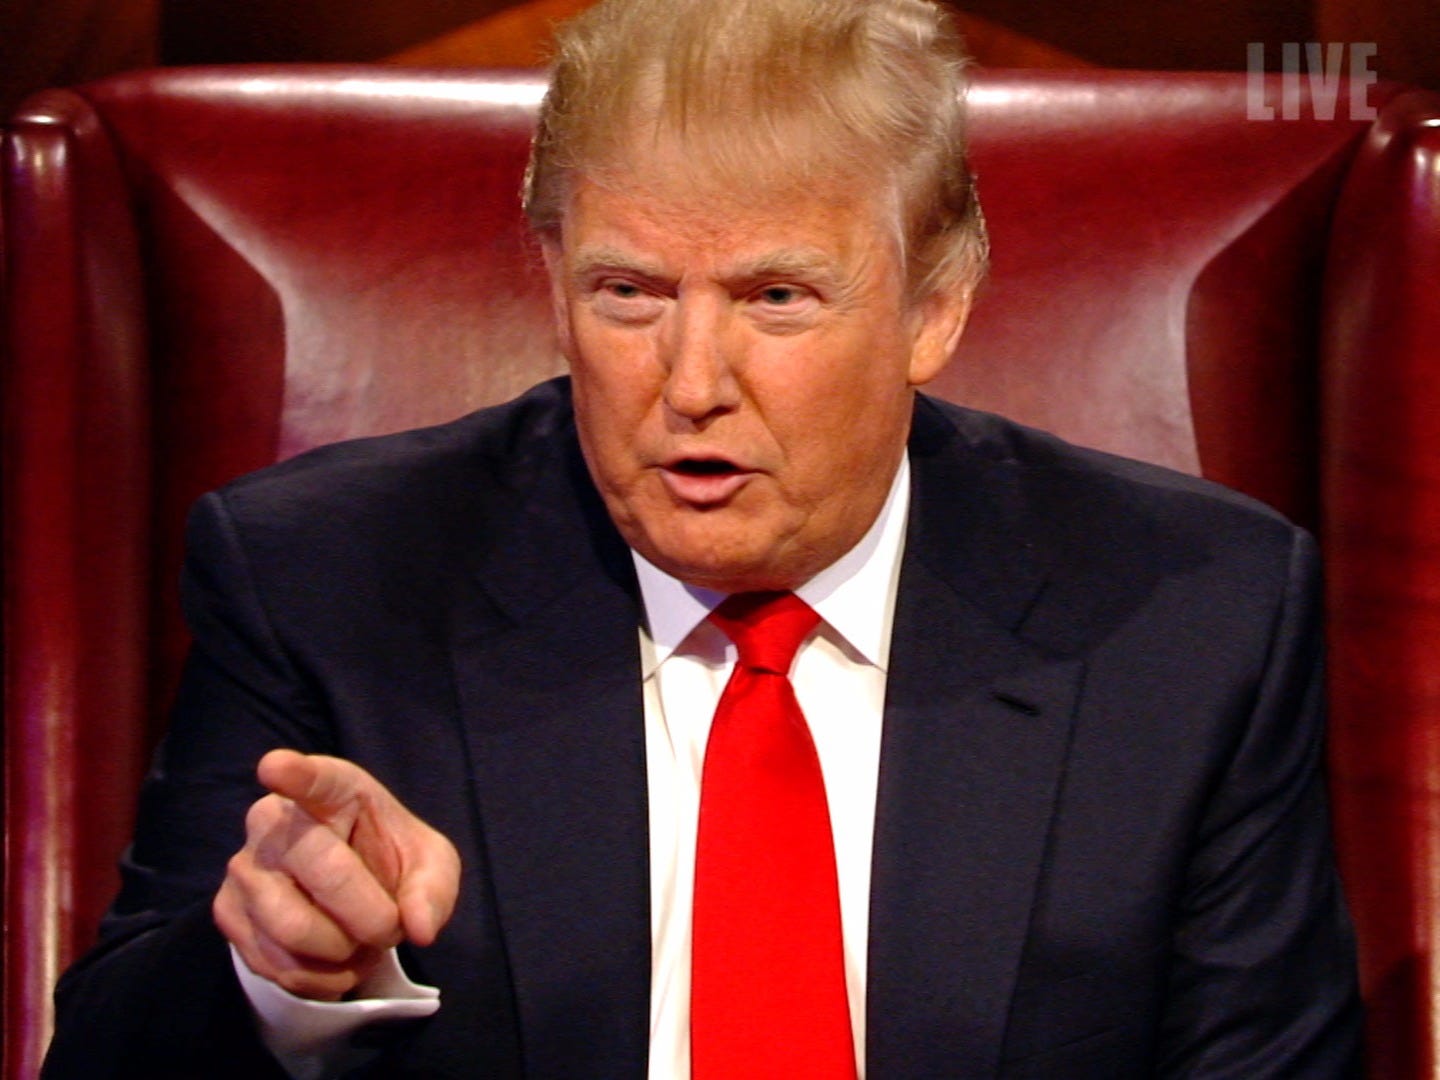 donald-trump-says-angry-nbc-execs-tried-to-change-his-mind-about-leaving-apprentice-to-run-for-president.jpg